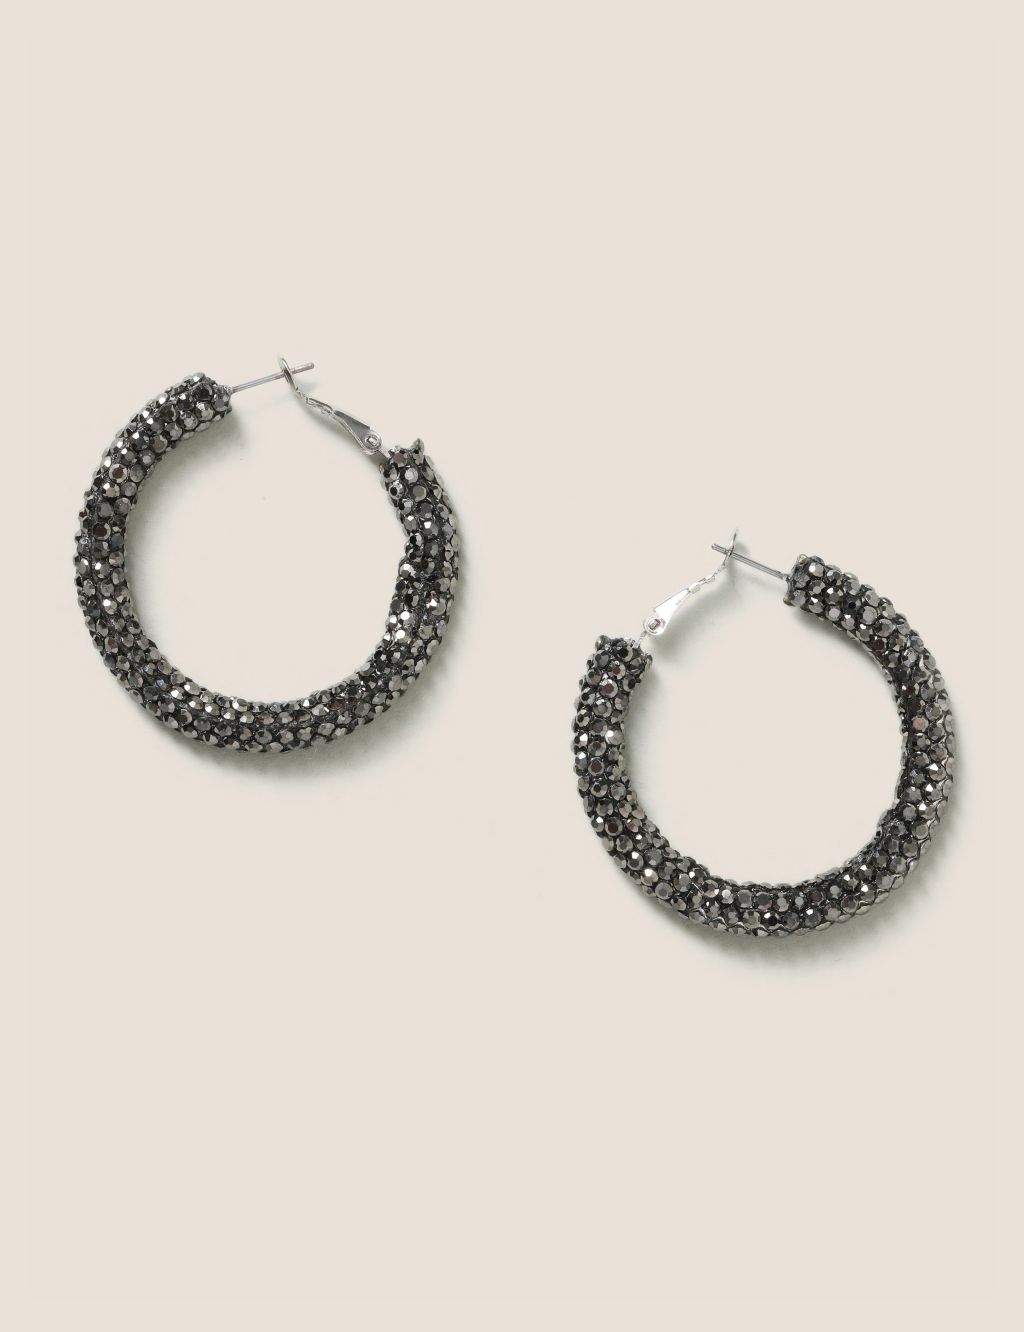 Black and White Drop Earrings image 1